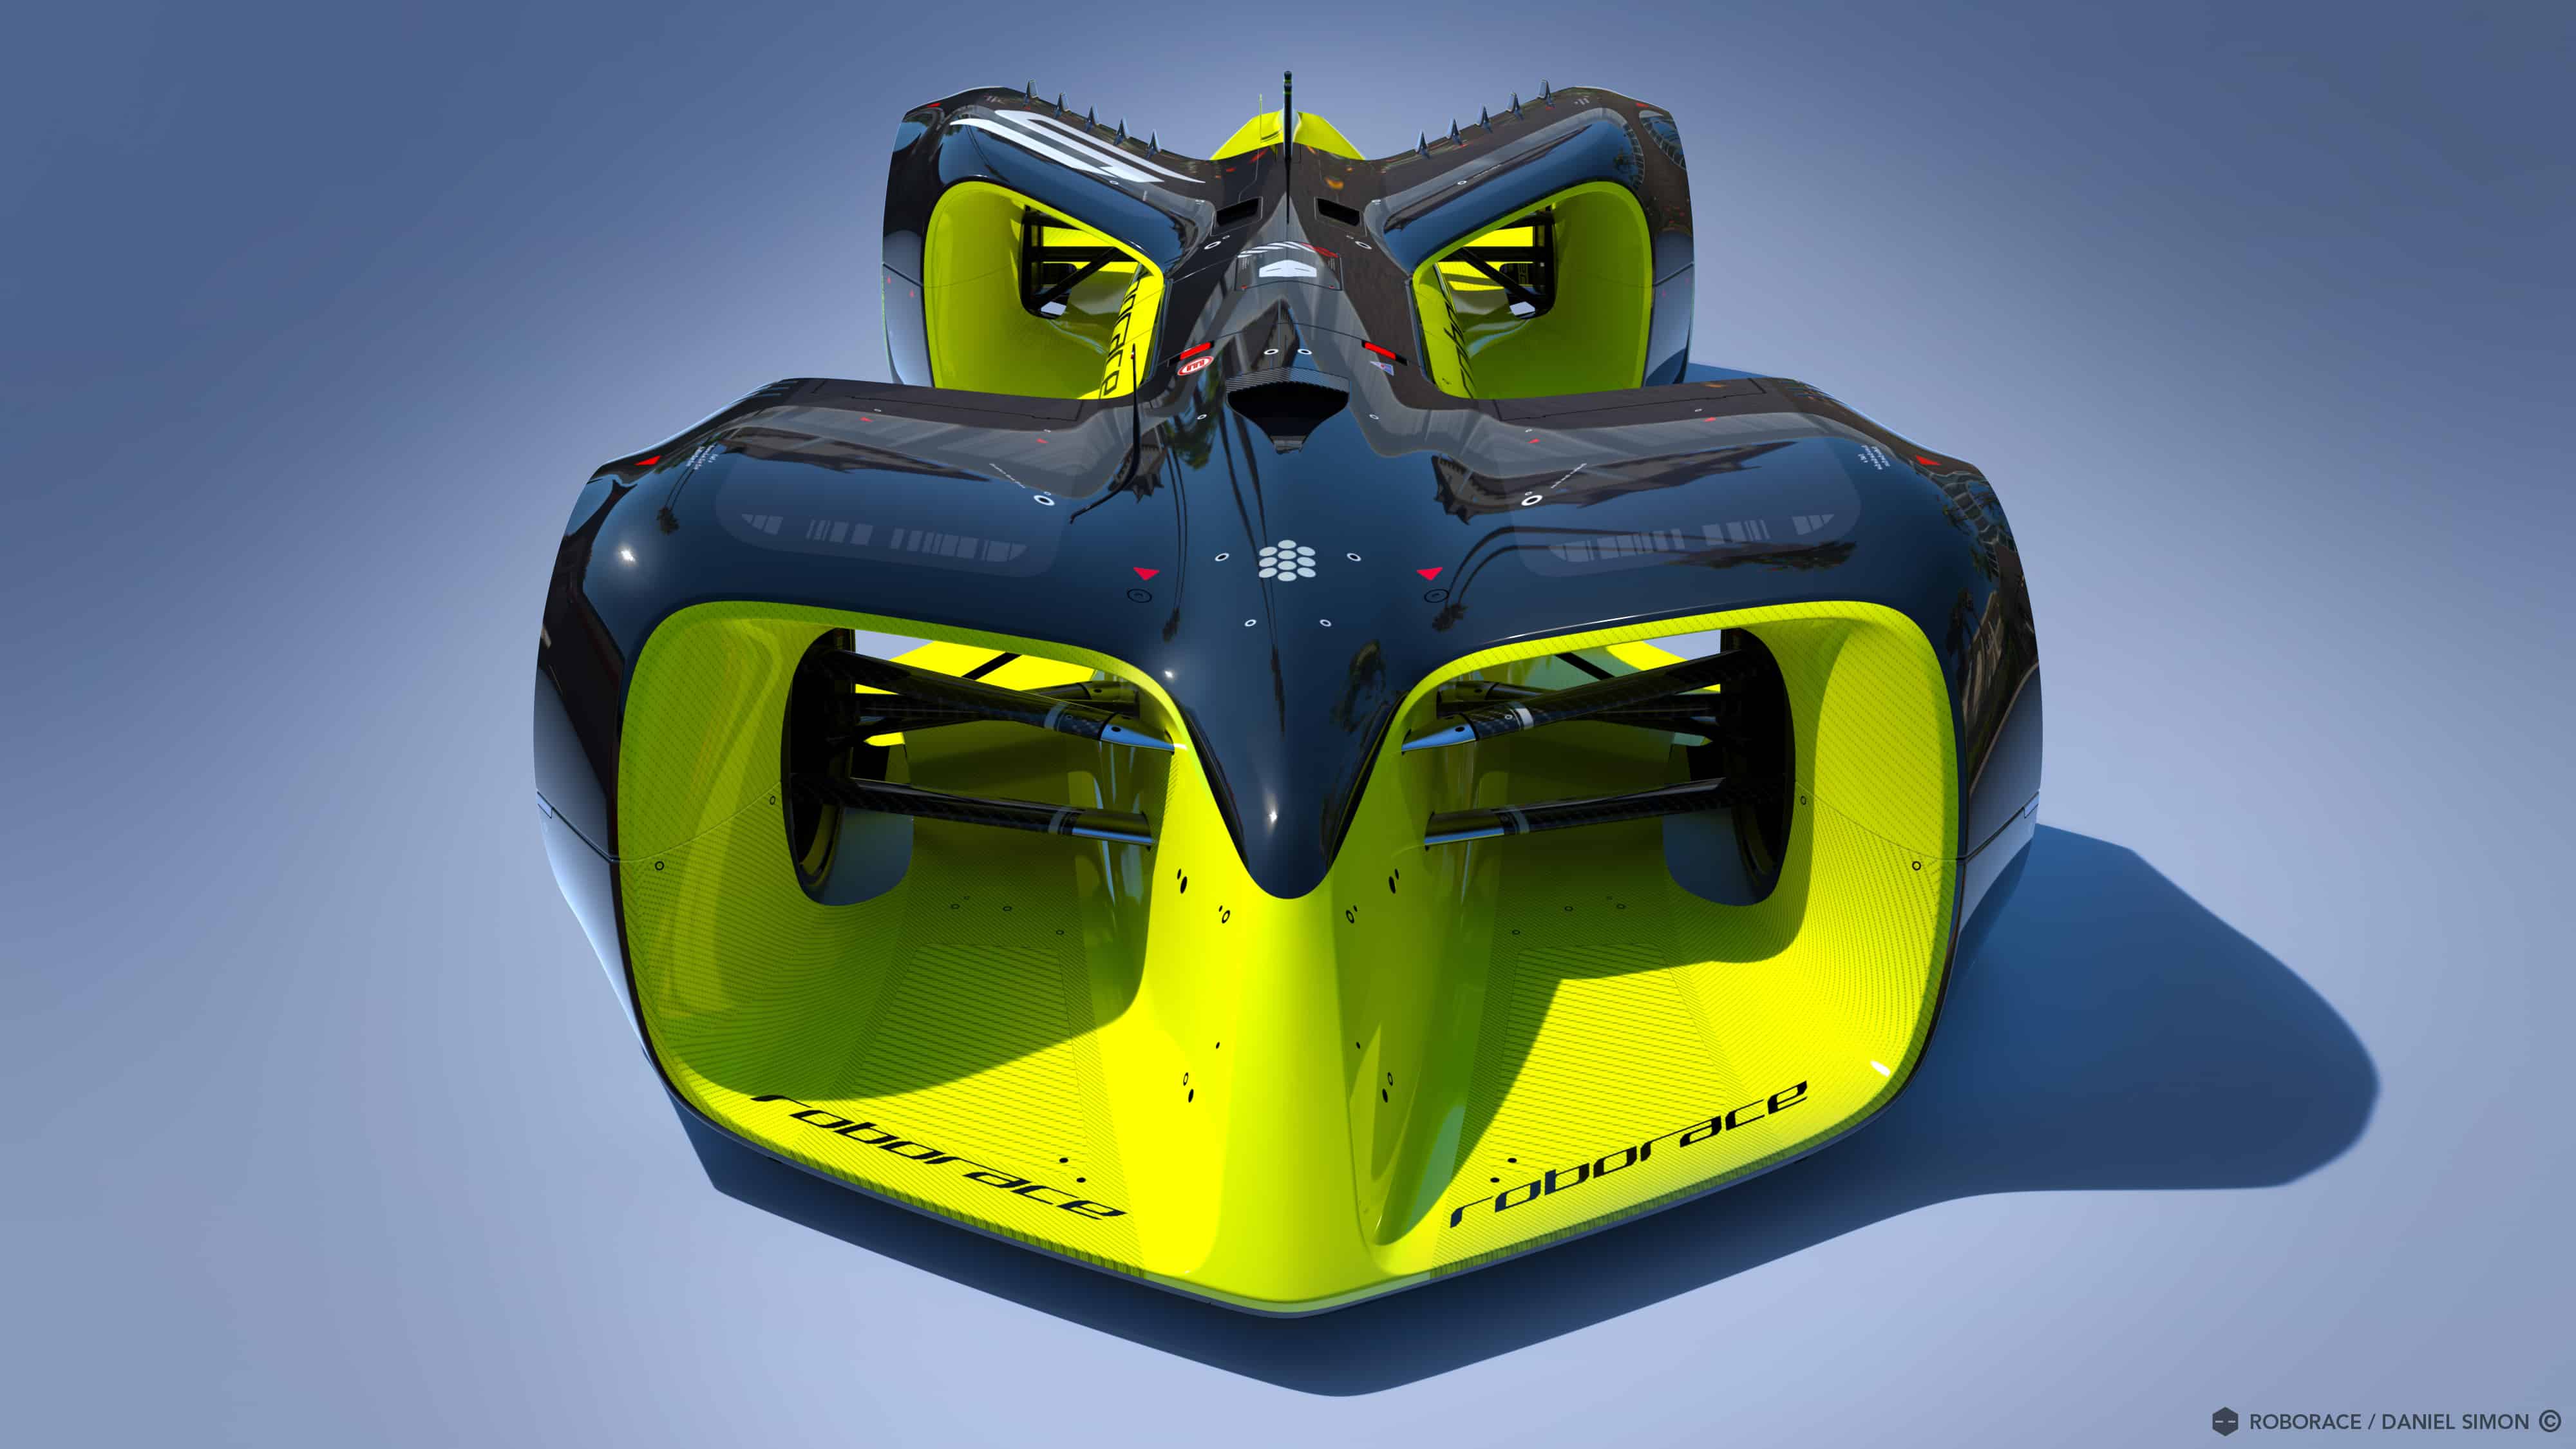 Not a view that any human driver will see in their rear-view mirror. Image by Chief Design Officer Daniel Simon / Roborace Ltd.